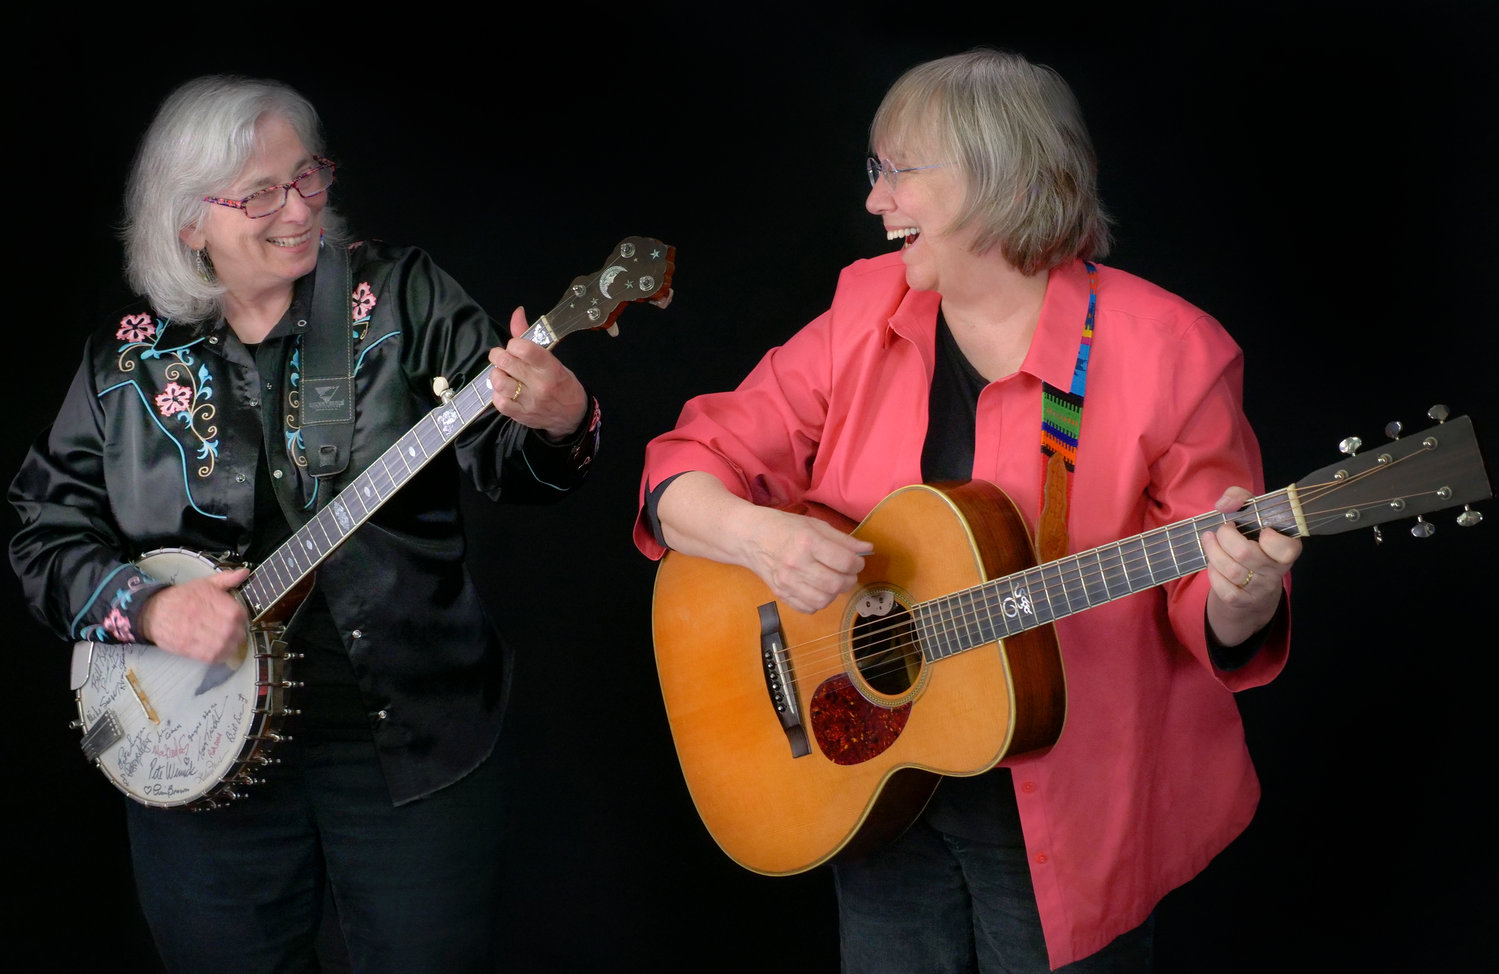 Cathy Fink, left, and Marcy Marxer perform at 7:30 p.m. Friday, Nov. 4, at the Kirkland Arts Center in Clinton.